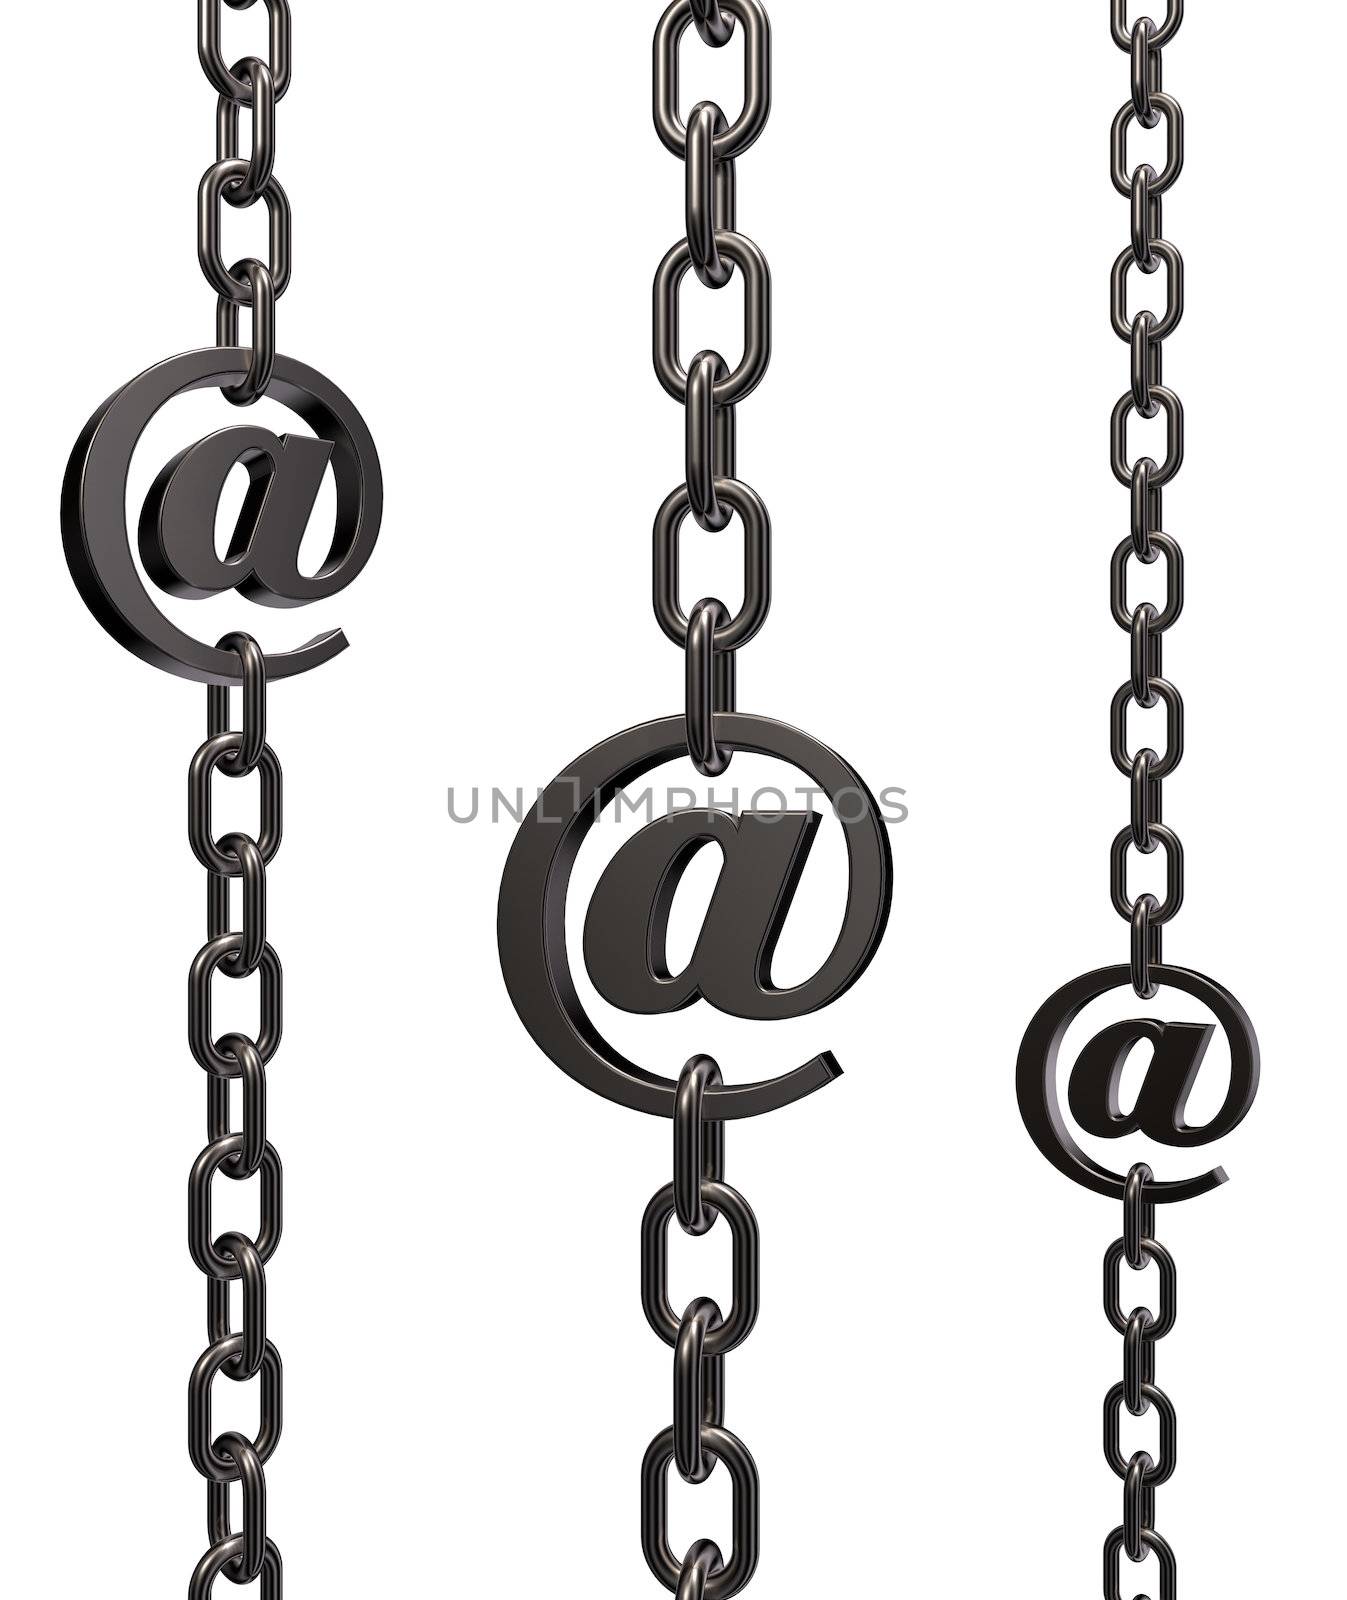 email chains by drizzd